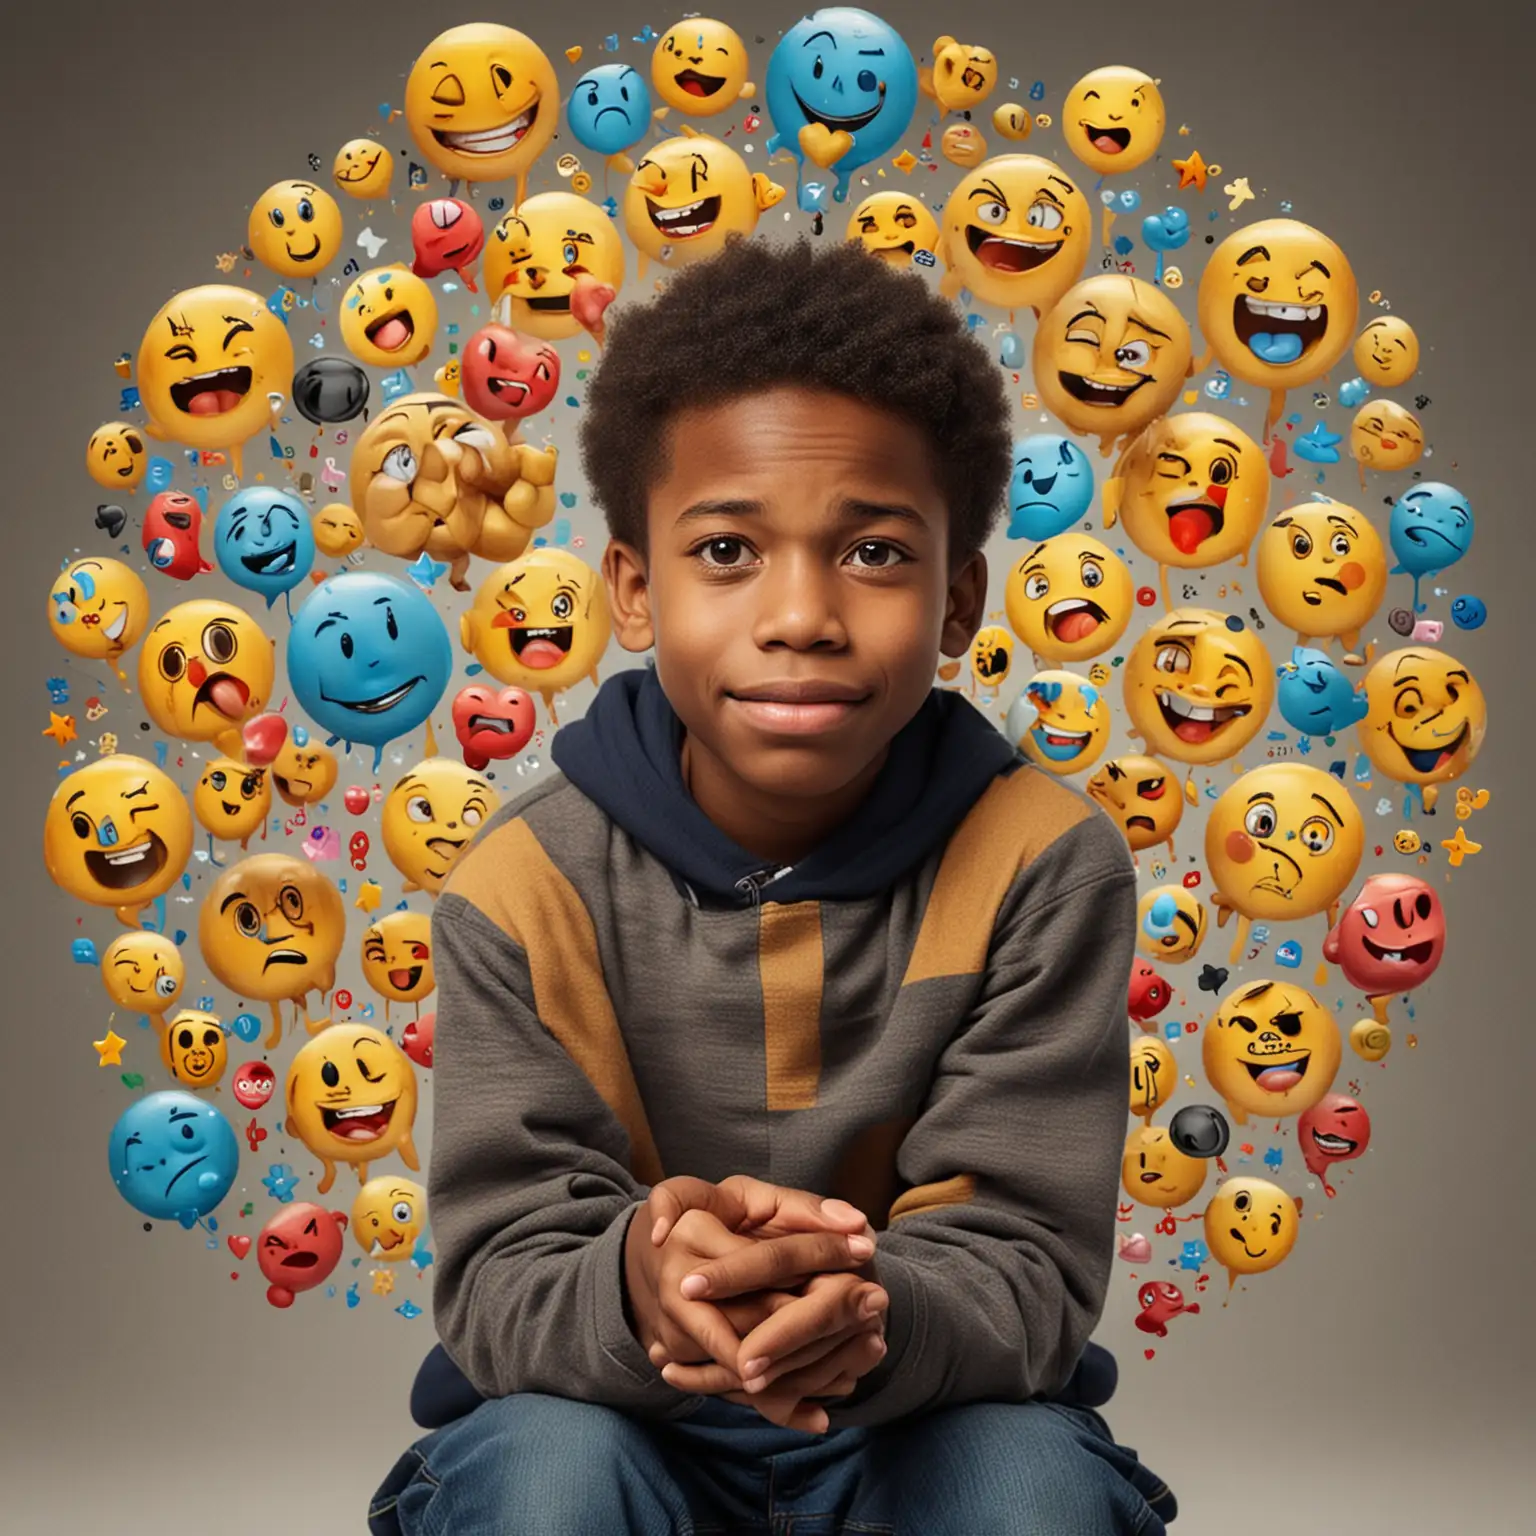 11 year old black boy sitting cross-legged, surrounded by various emoticons representing different feelings (happy, sad, worried, excited).